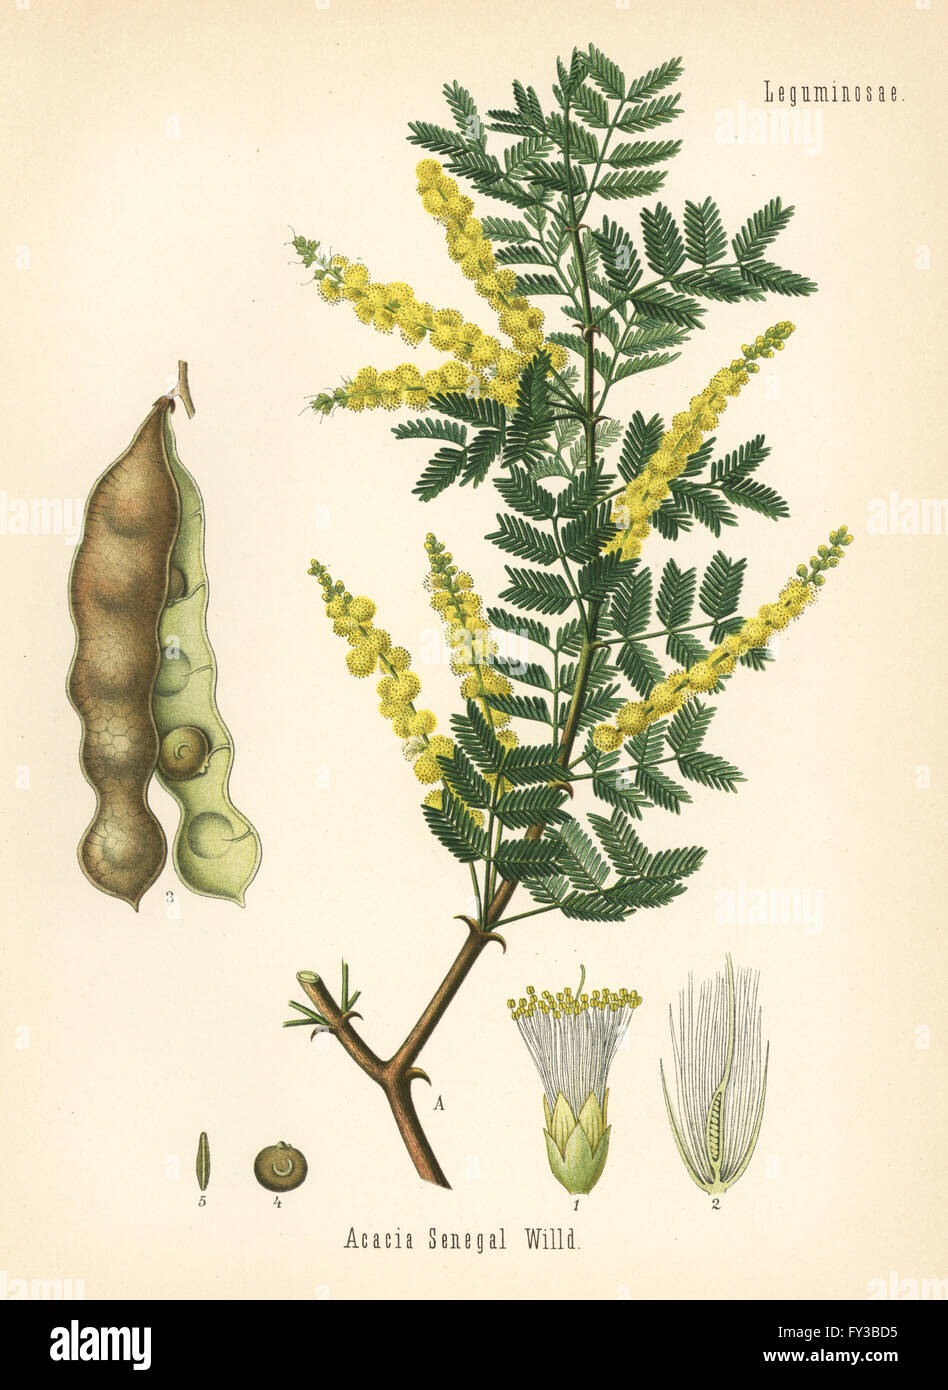 Gum acacia or gum arabic tree, Acacia senegal. Chromolithograph after a botanical illustration from Hermann Adolph Koehler's Medicinal Plants, edited by Gustav Pabst, Koehler, Germany, 1887. Stock Photo